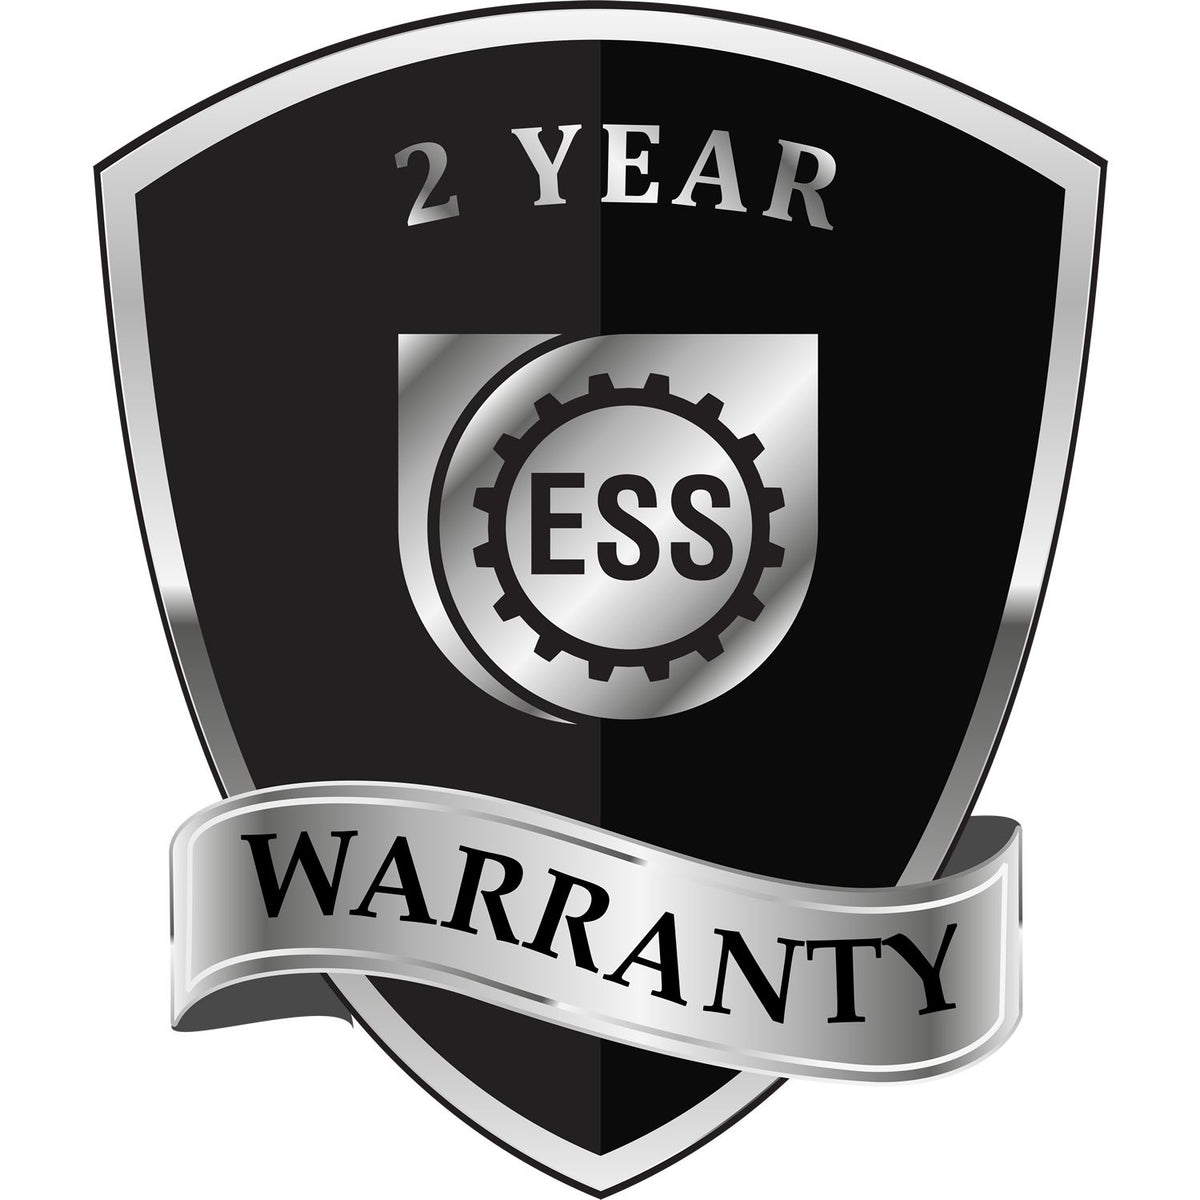 A black and silver badge or emblem showing warranty information for the Hybrid Virginia Geologist Seal